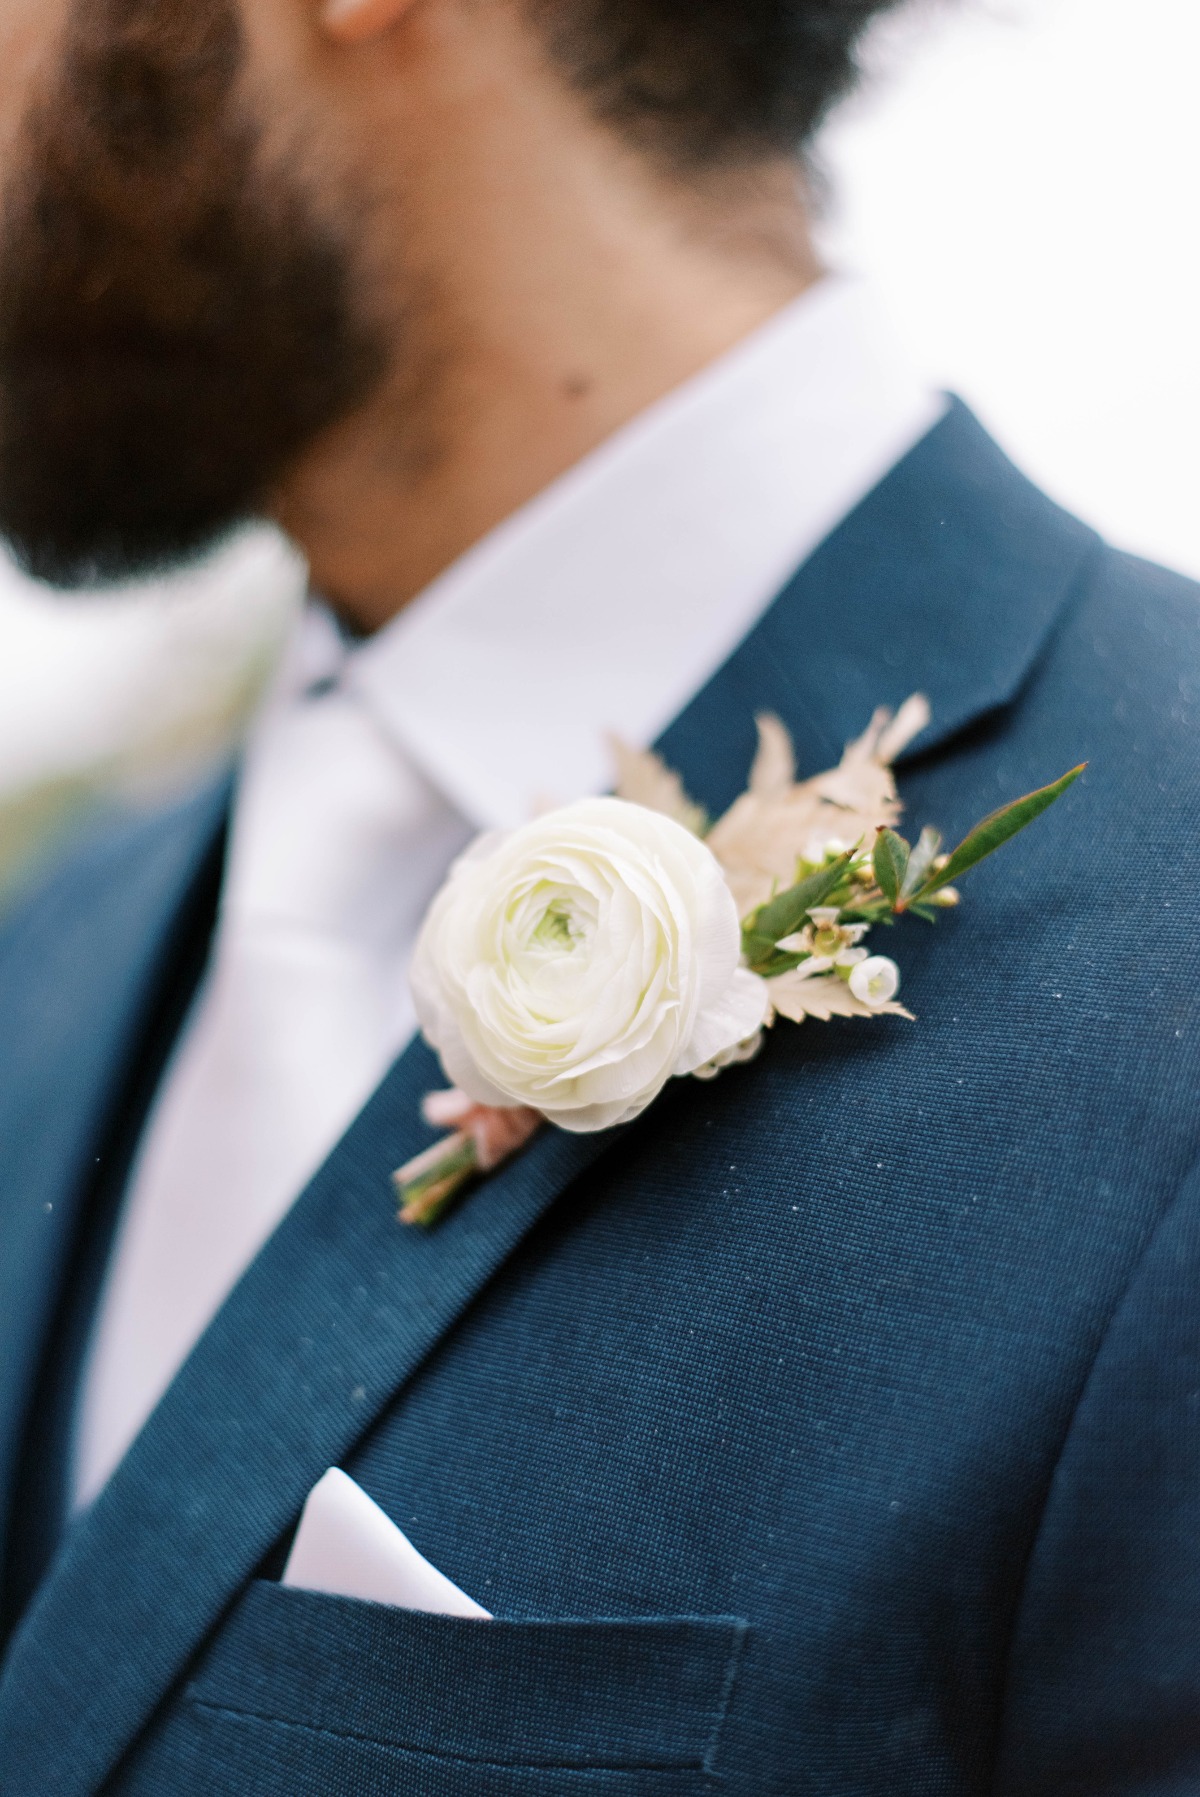 Close-up of groom's boutonniere